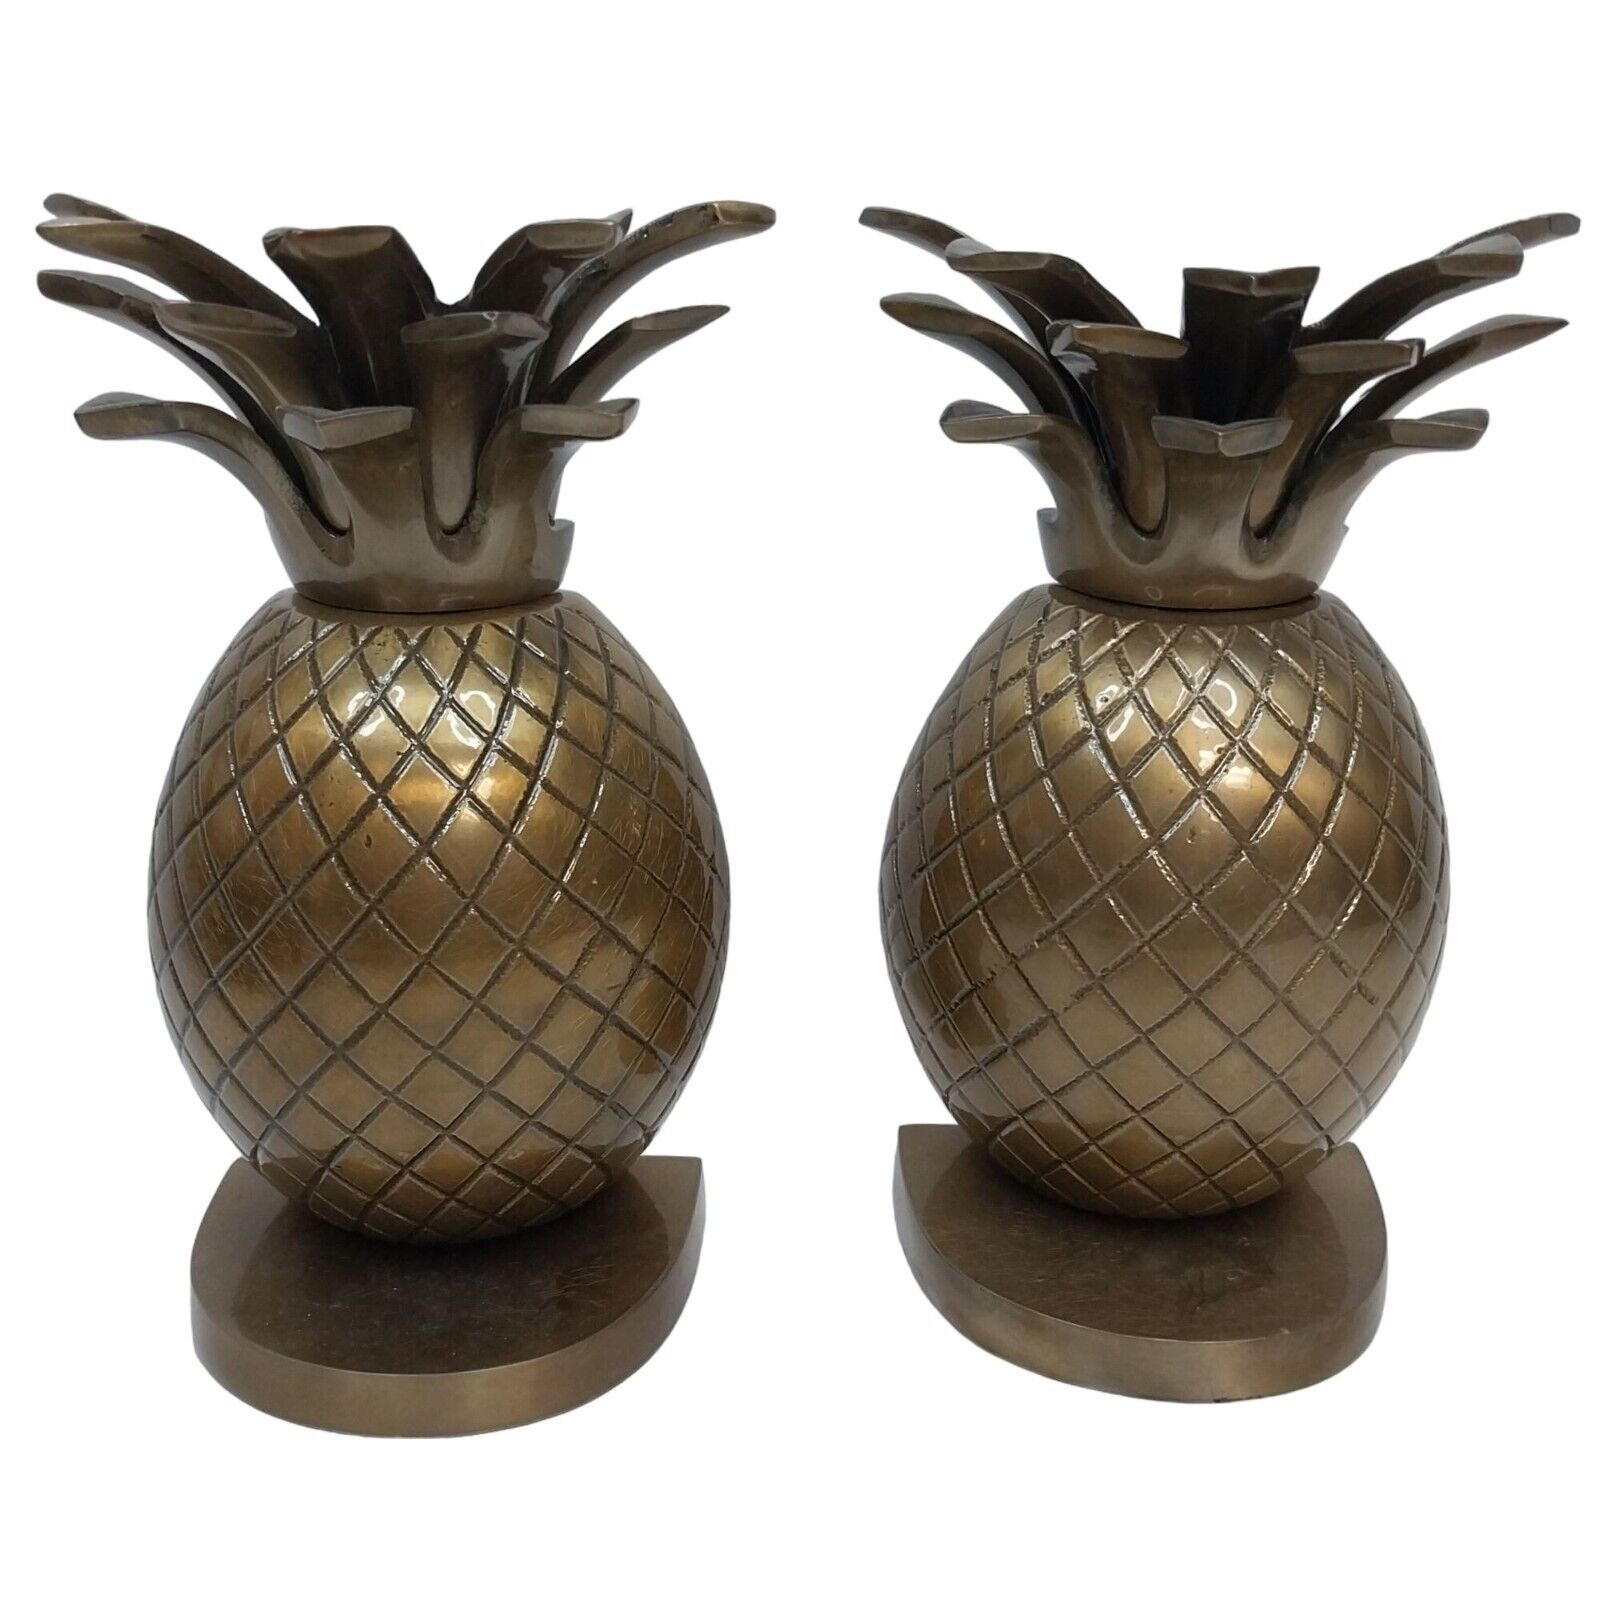 Vintage Brass Pineapple Bookends Set of 2